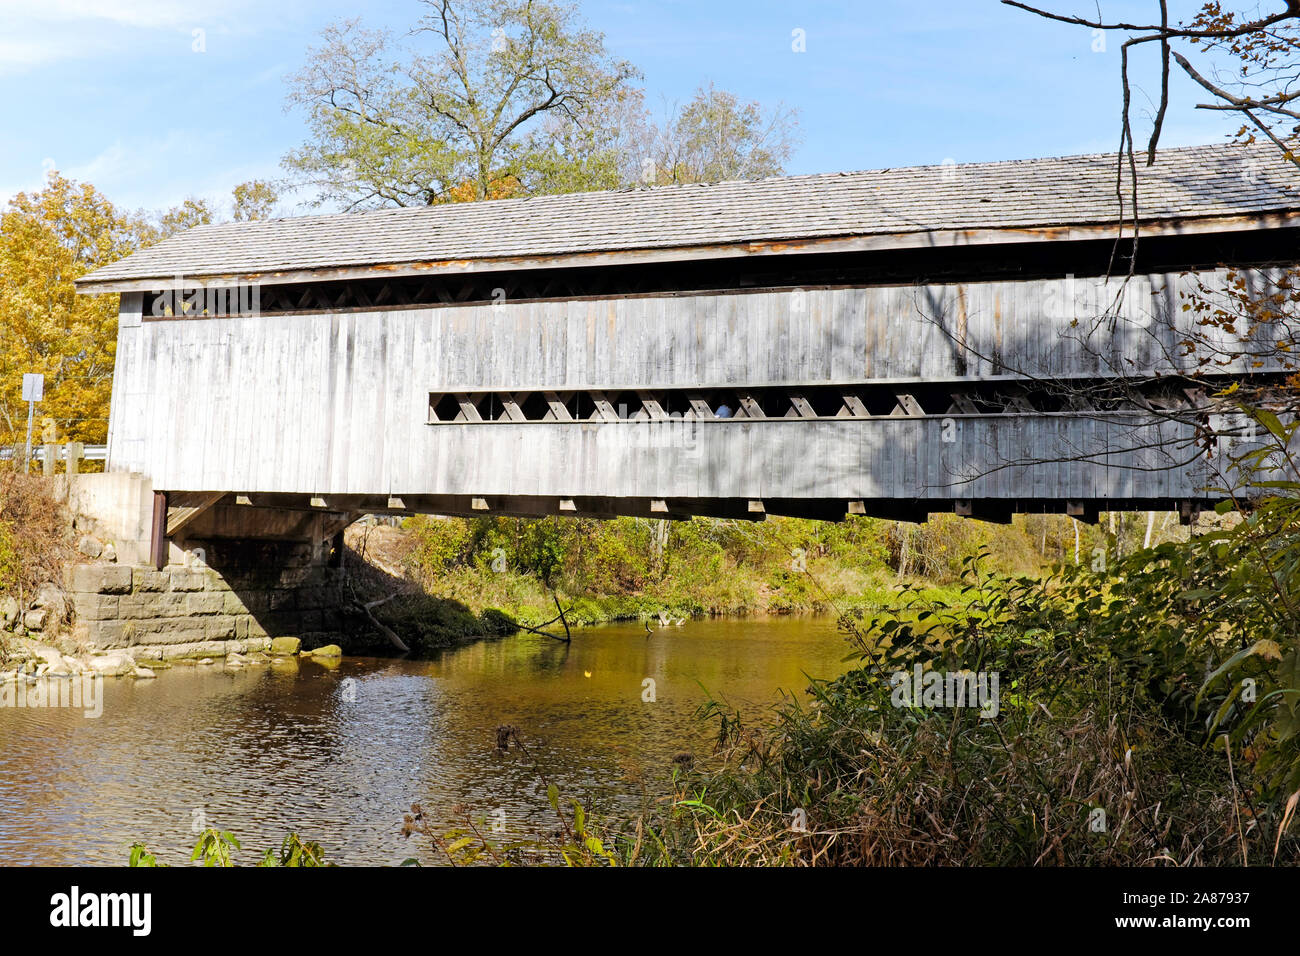 The wooden covered drivable Doyle Road Bridge over Mill Creek in Jefferson Township, Ashtabula County, Ohio is a single span Town truss design. Stock Photo